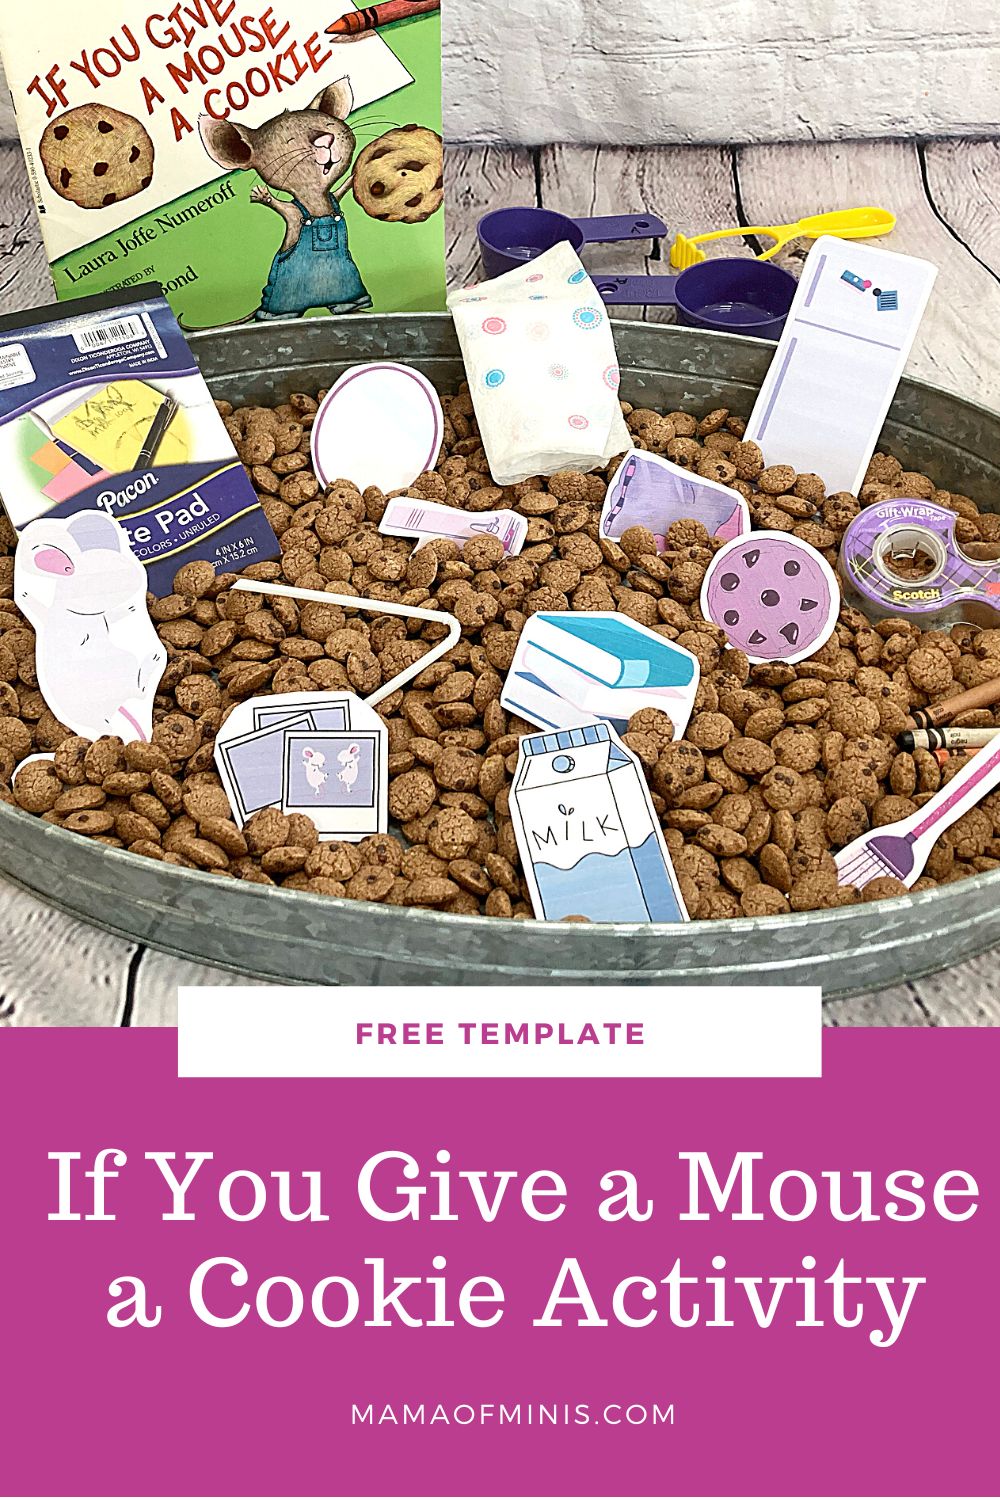 If You Give a Mouse a Cookie Activity Free Template